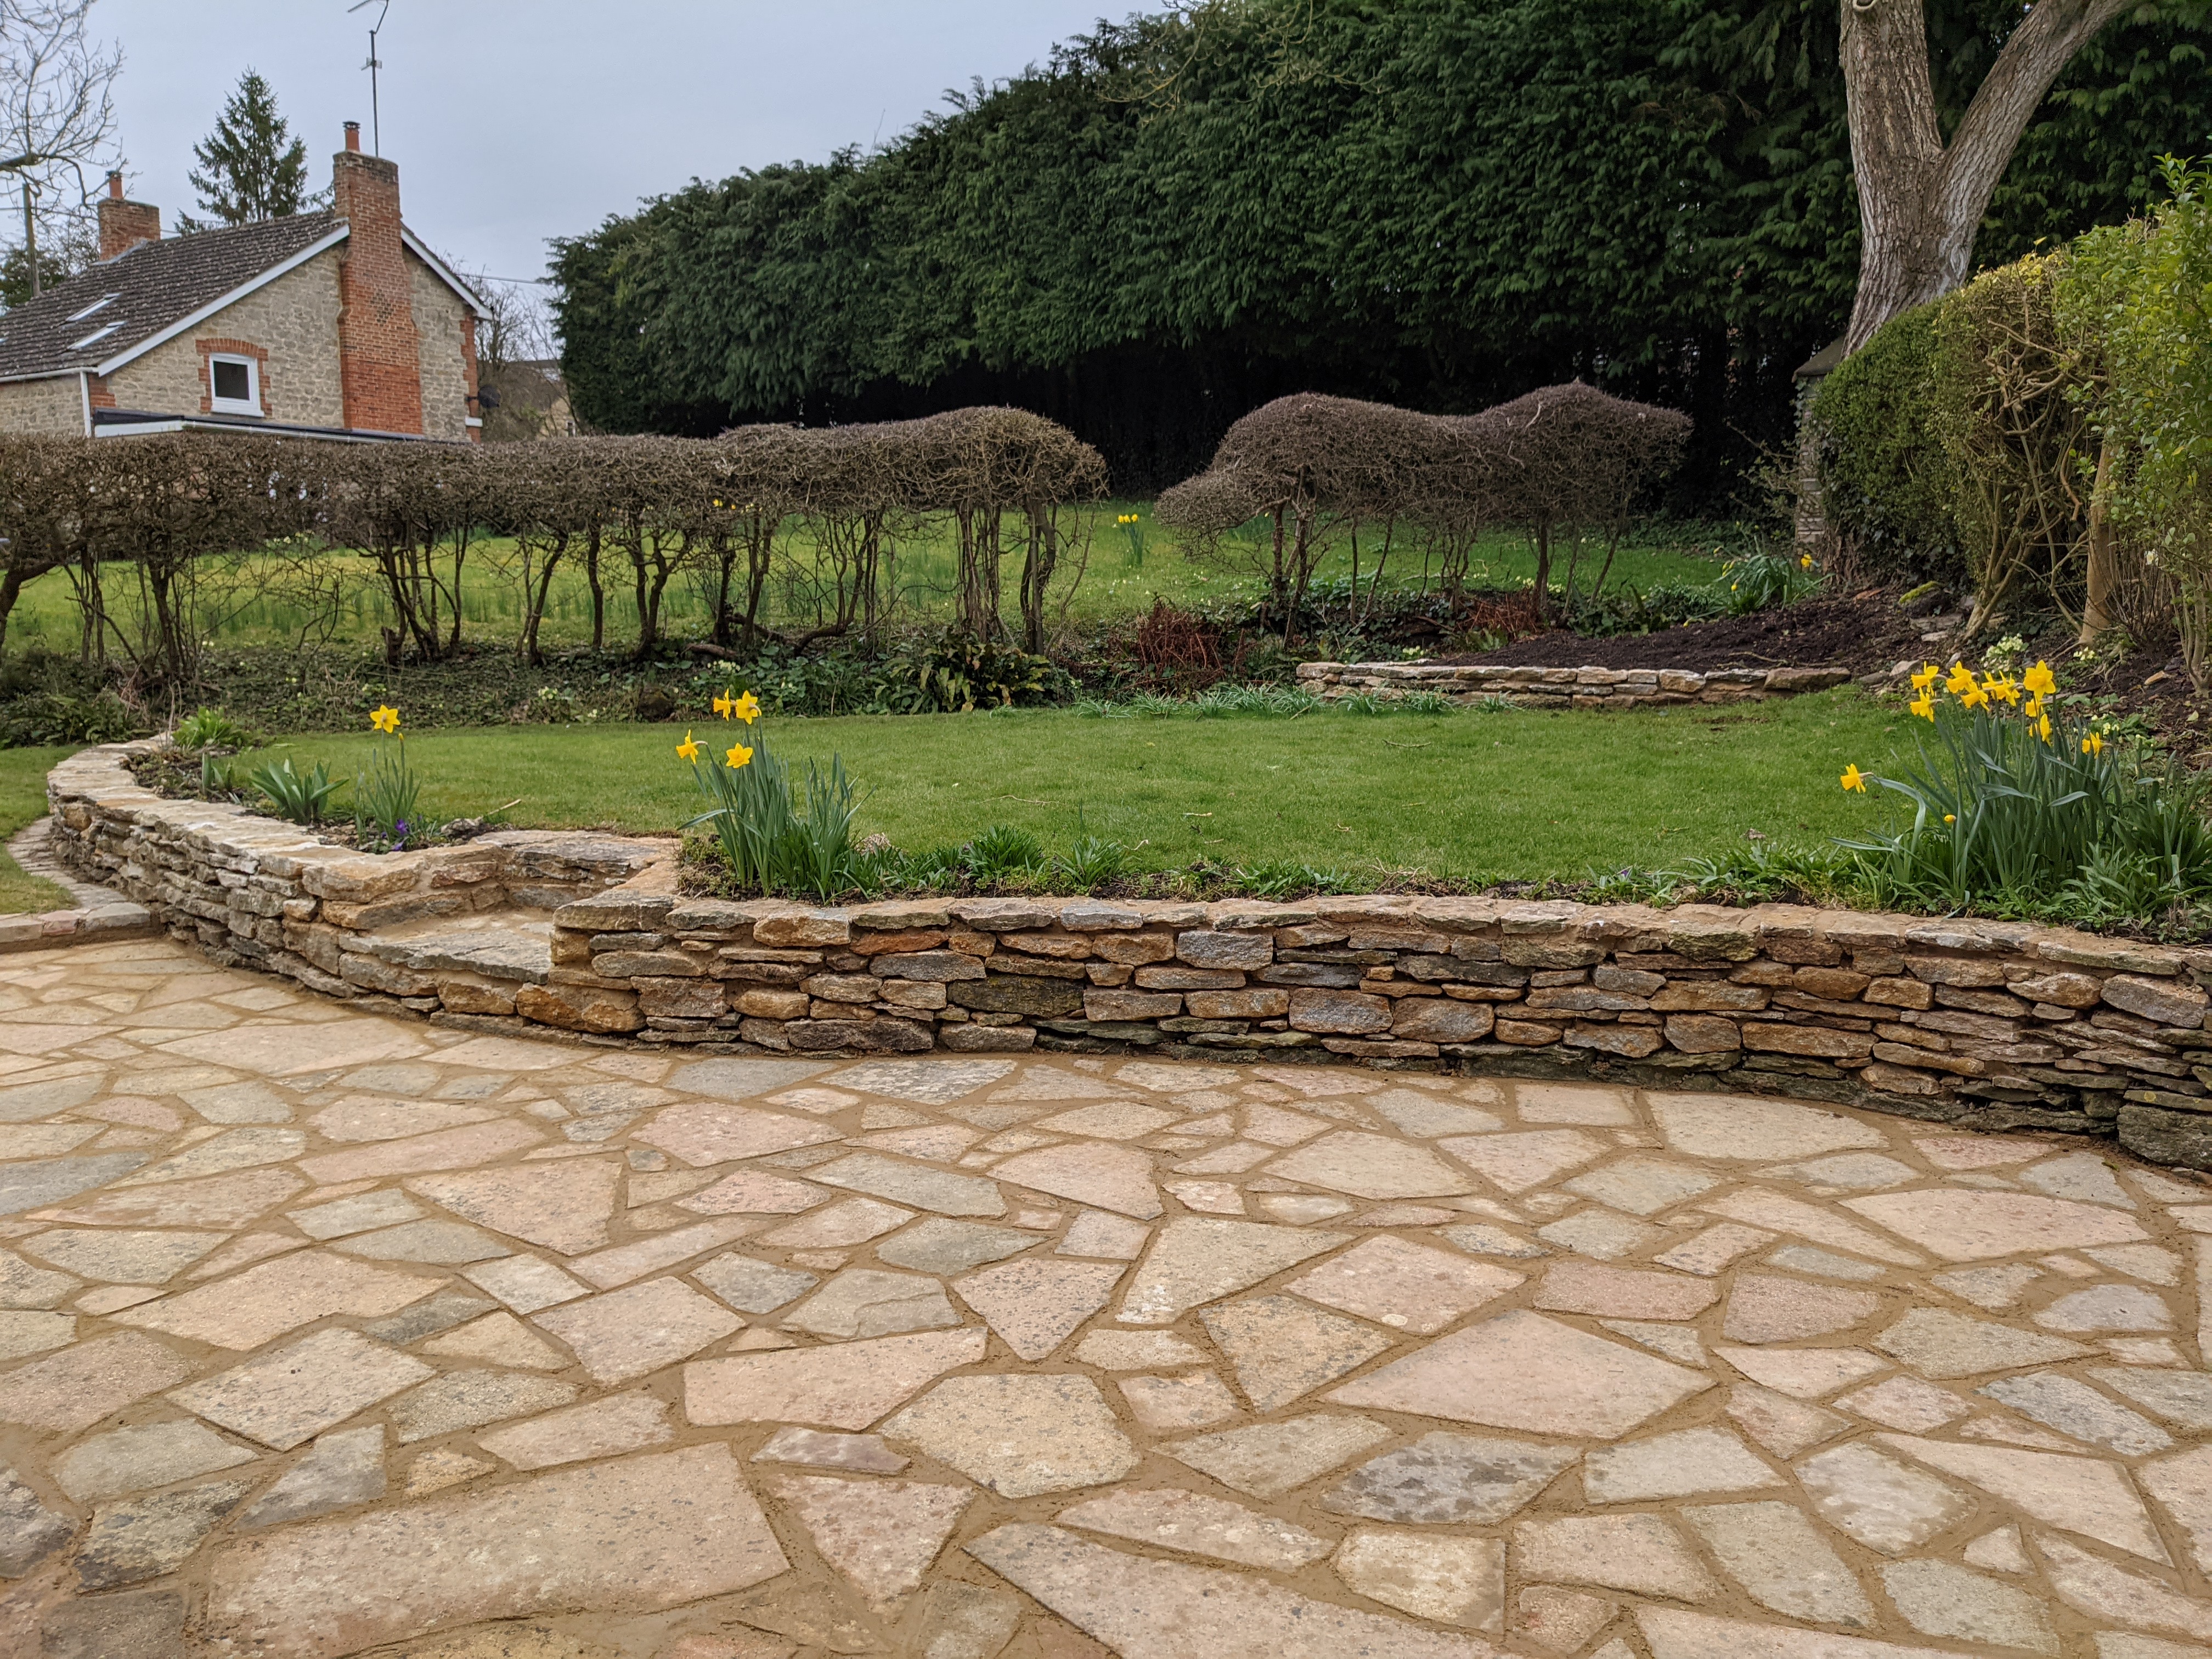 Cotswold Stone Wall and Crazy Paving